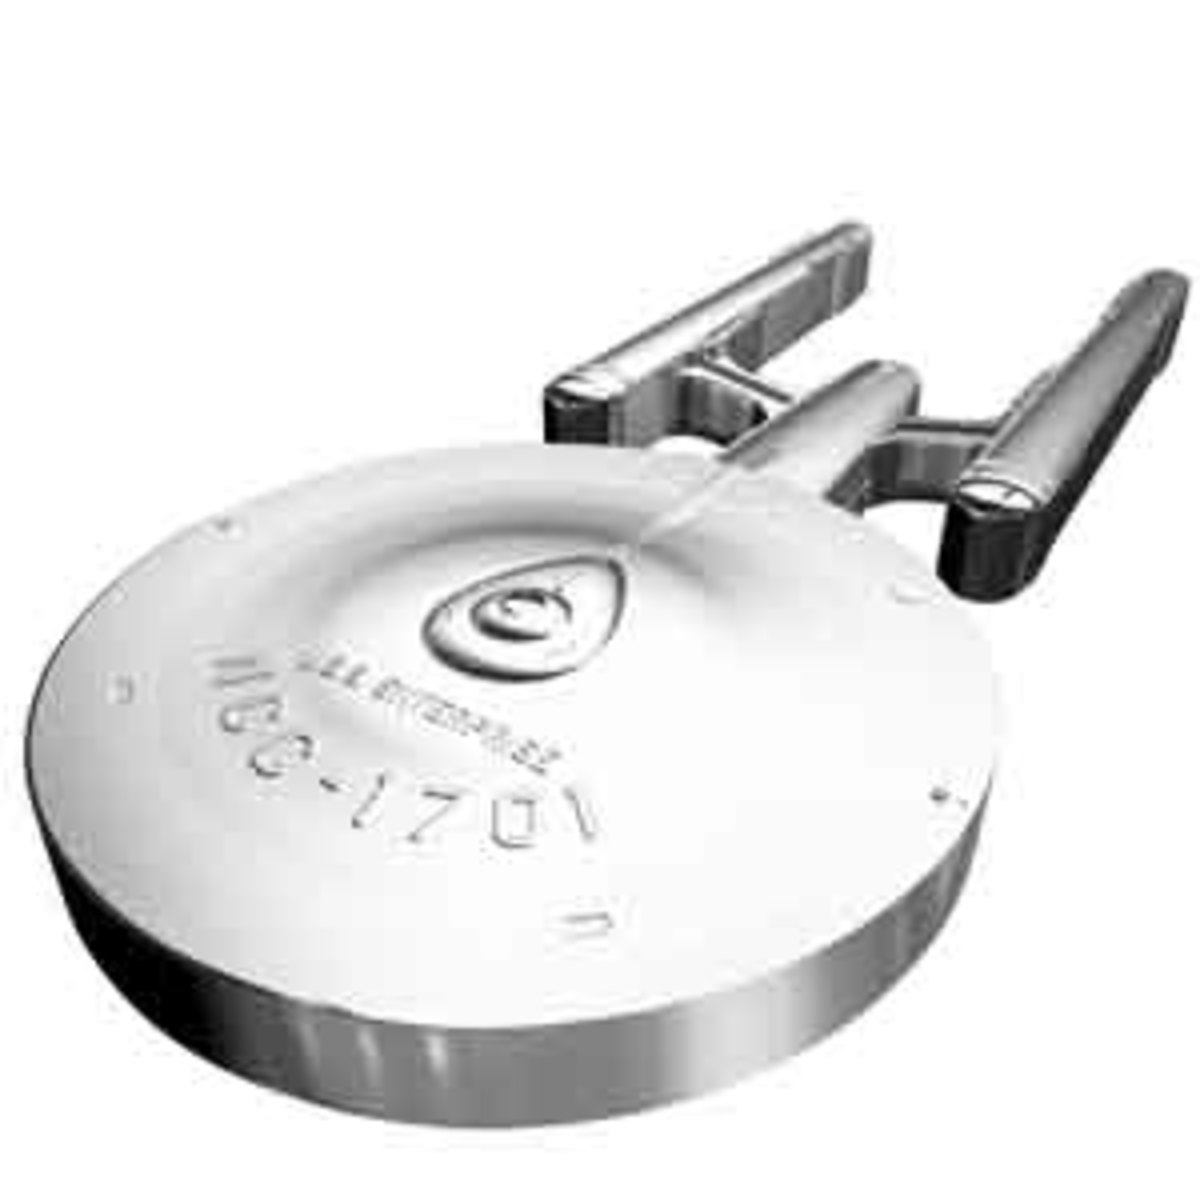  “Starship Enterprise” is the latest Canadian $100 struck by the Royal Canadian Mint from a single 10-ounce piece of .999 fine silver. (Image courtesy Royal Canadian Mint)